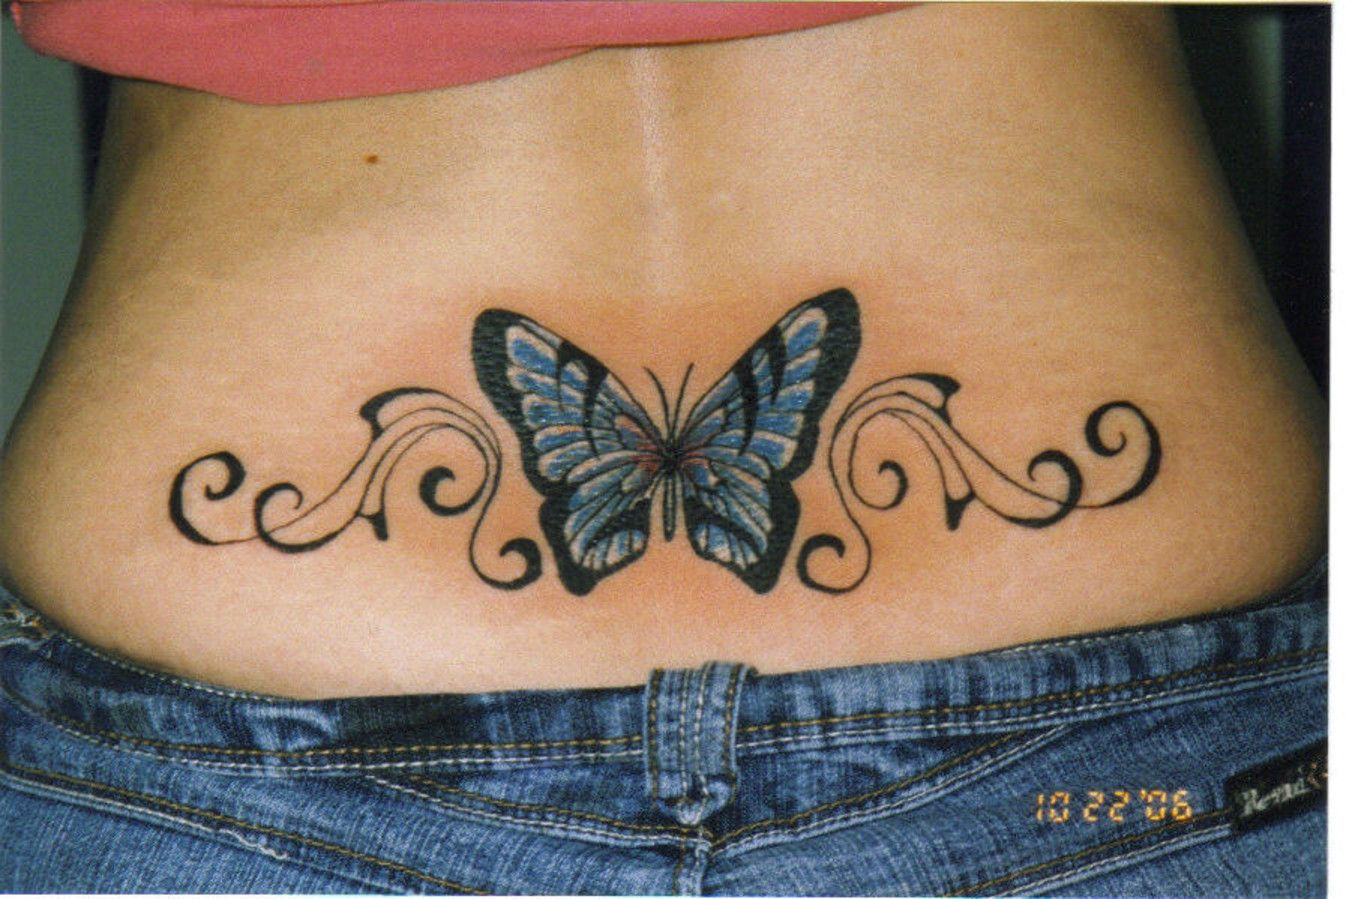 Free Tattoo Designs Ideas Ink Lower Back Tattoo Designs within size 1364 X 899